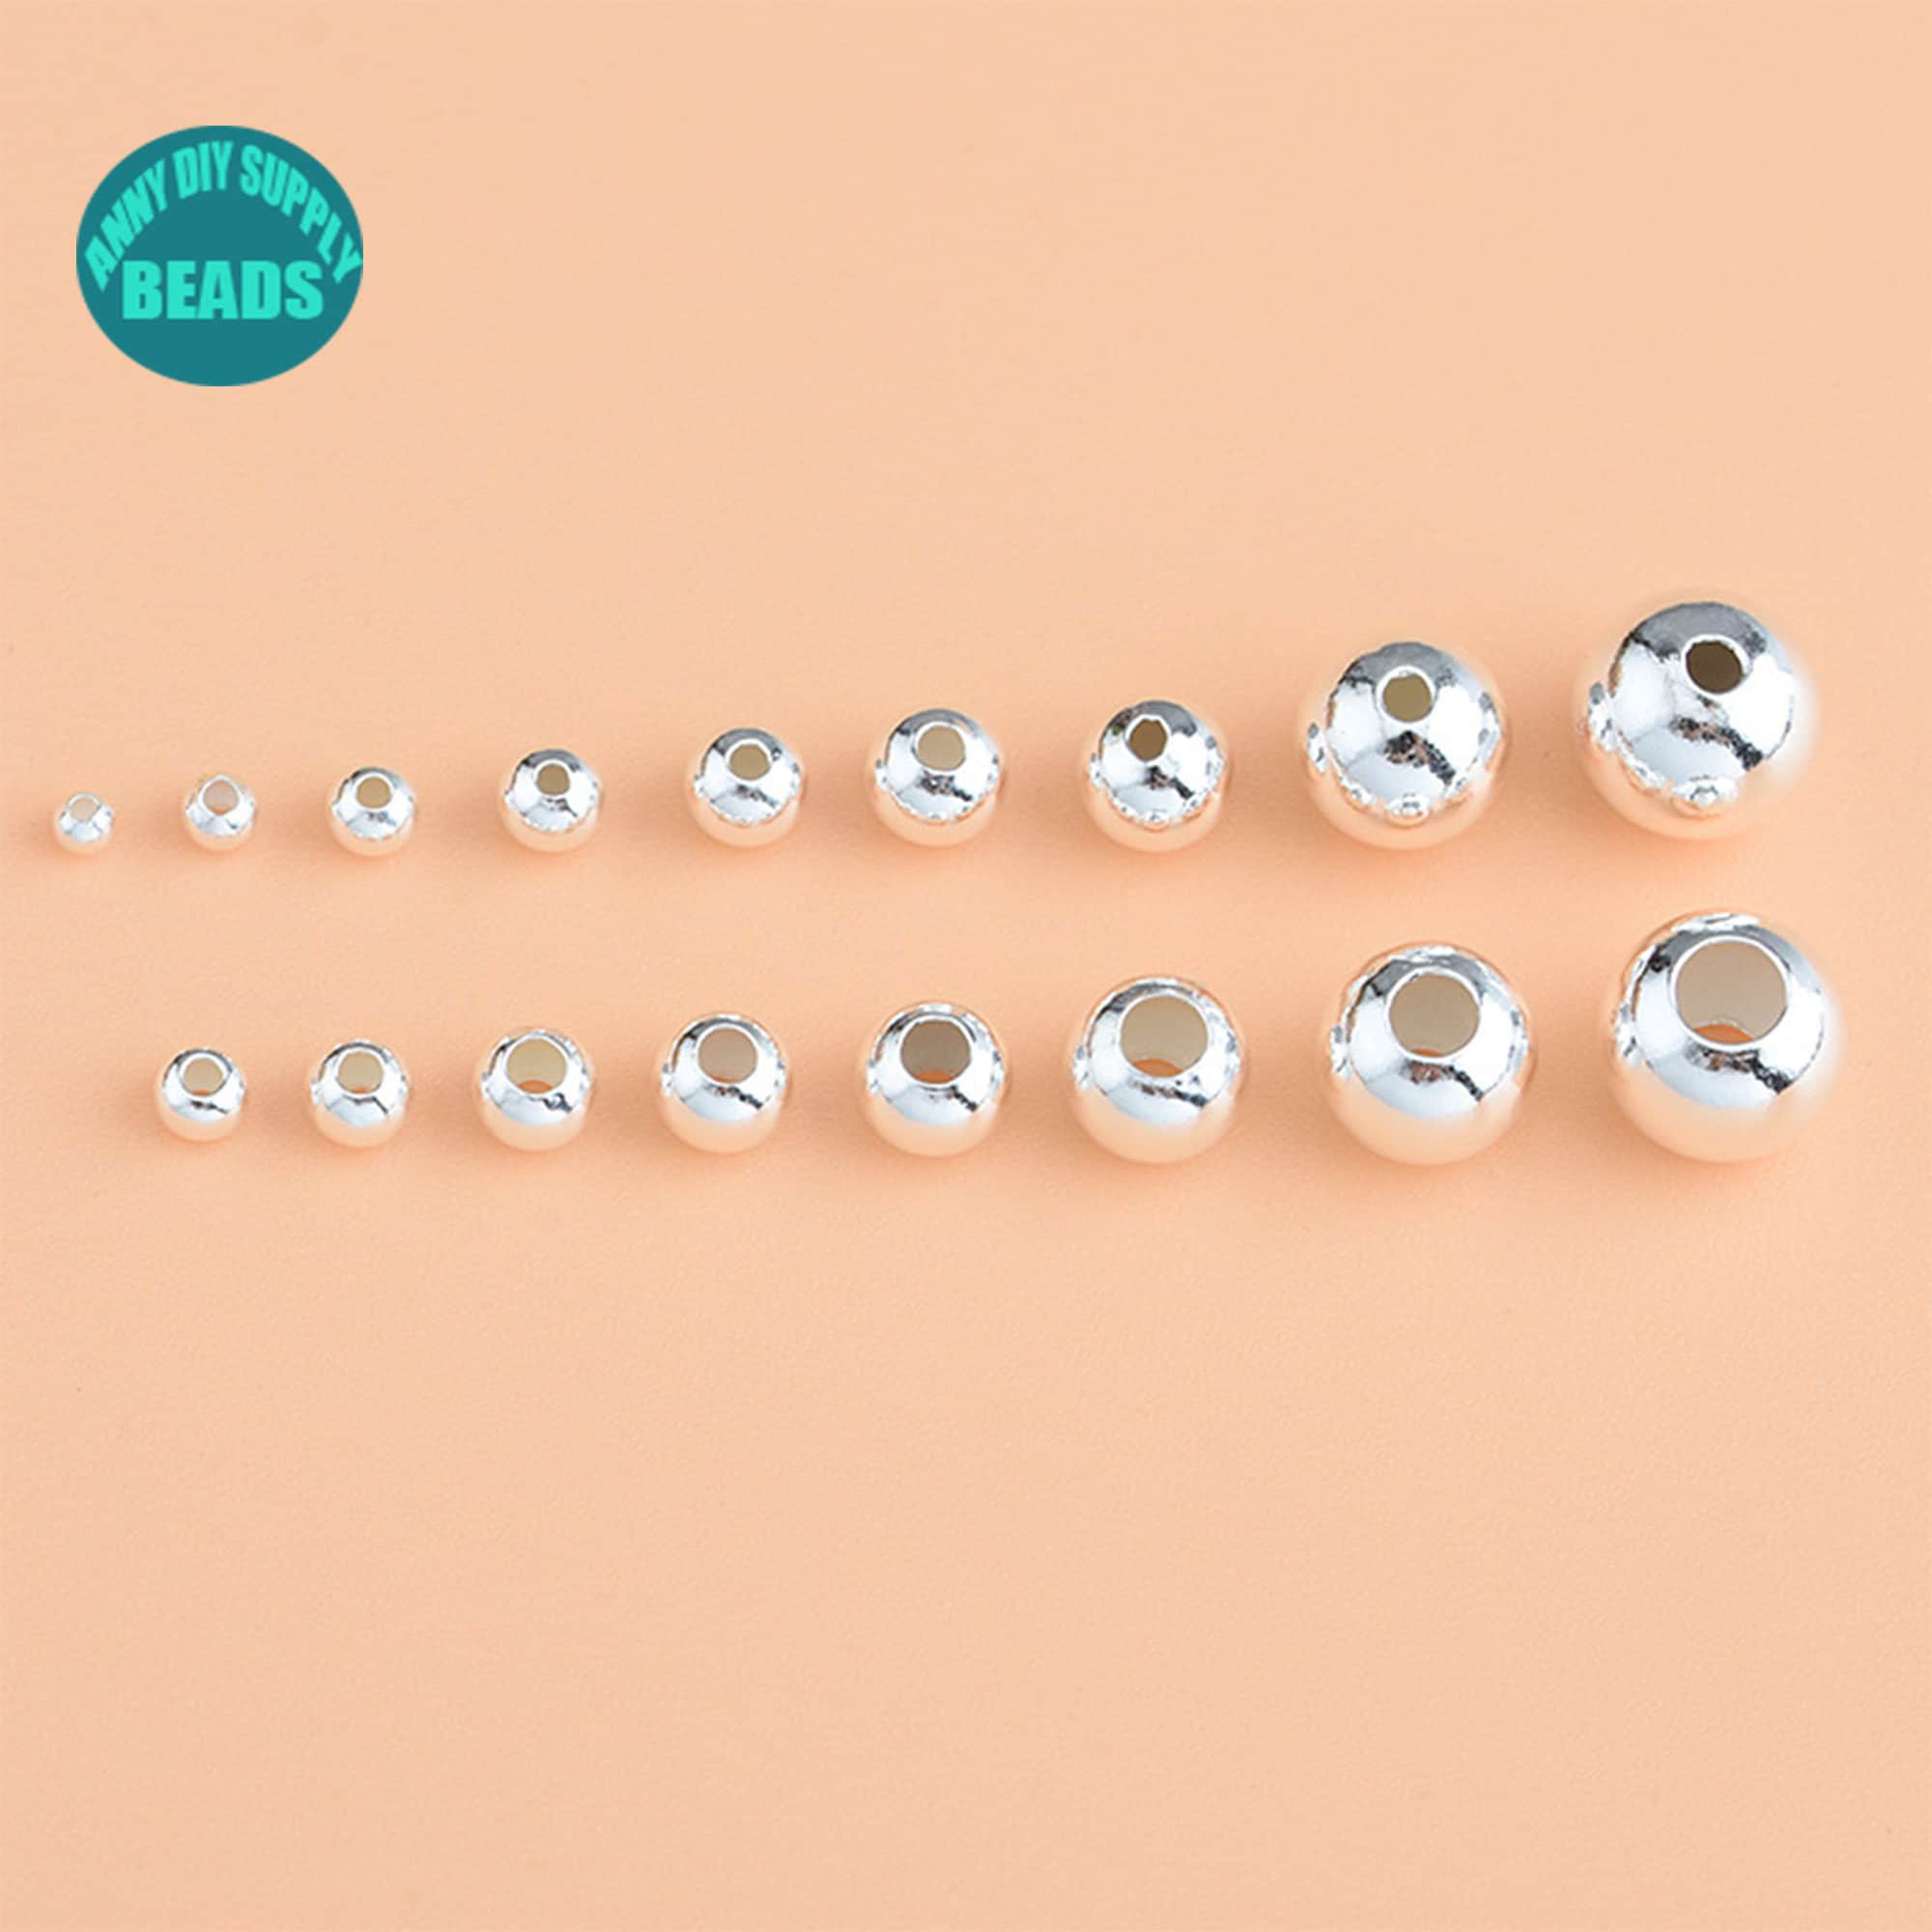 925 Sterling Silver Loose Beads, 6mm Round Smooth Beads, High